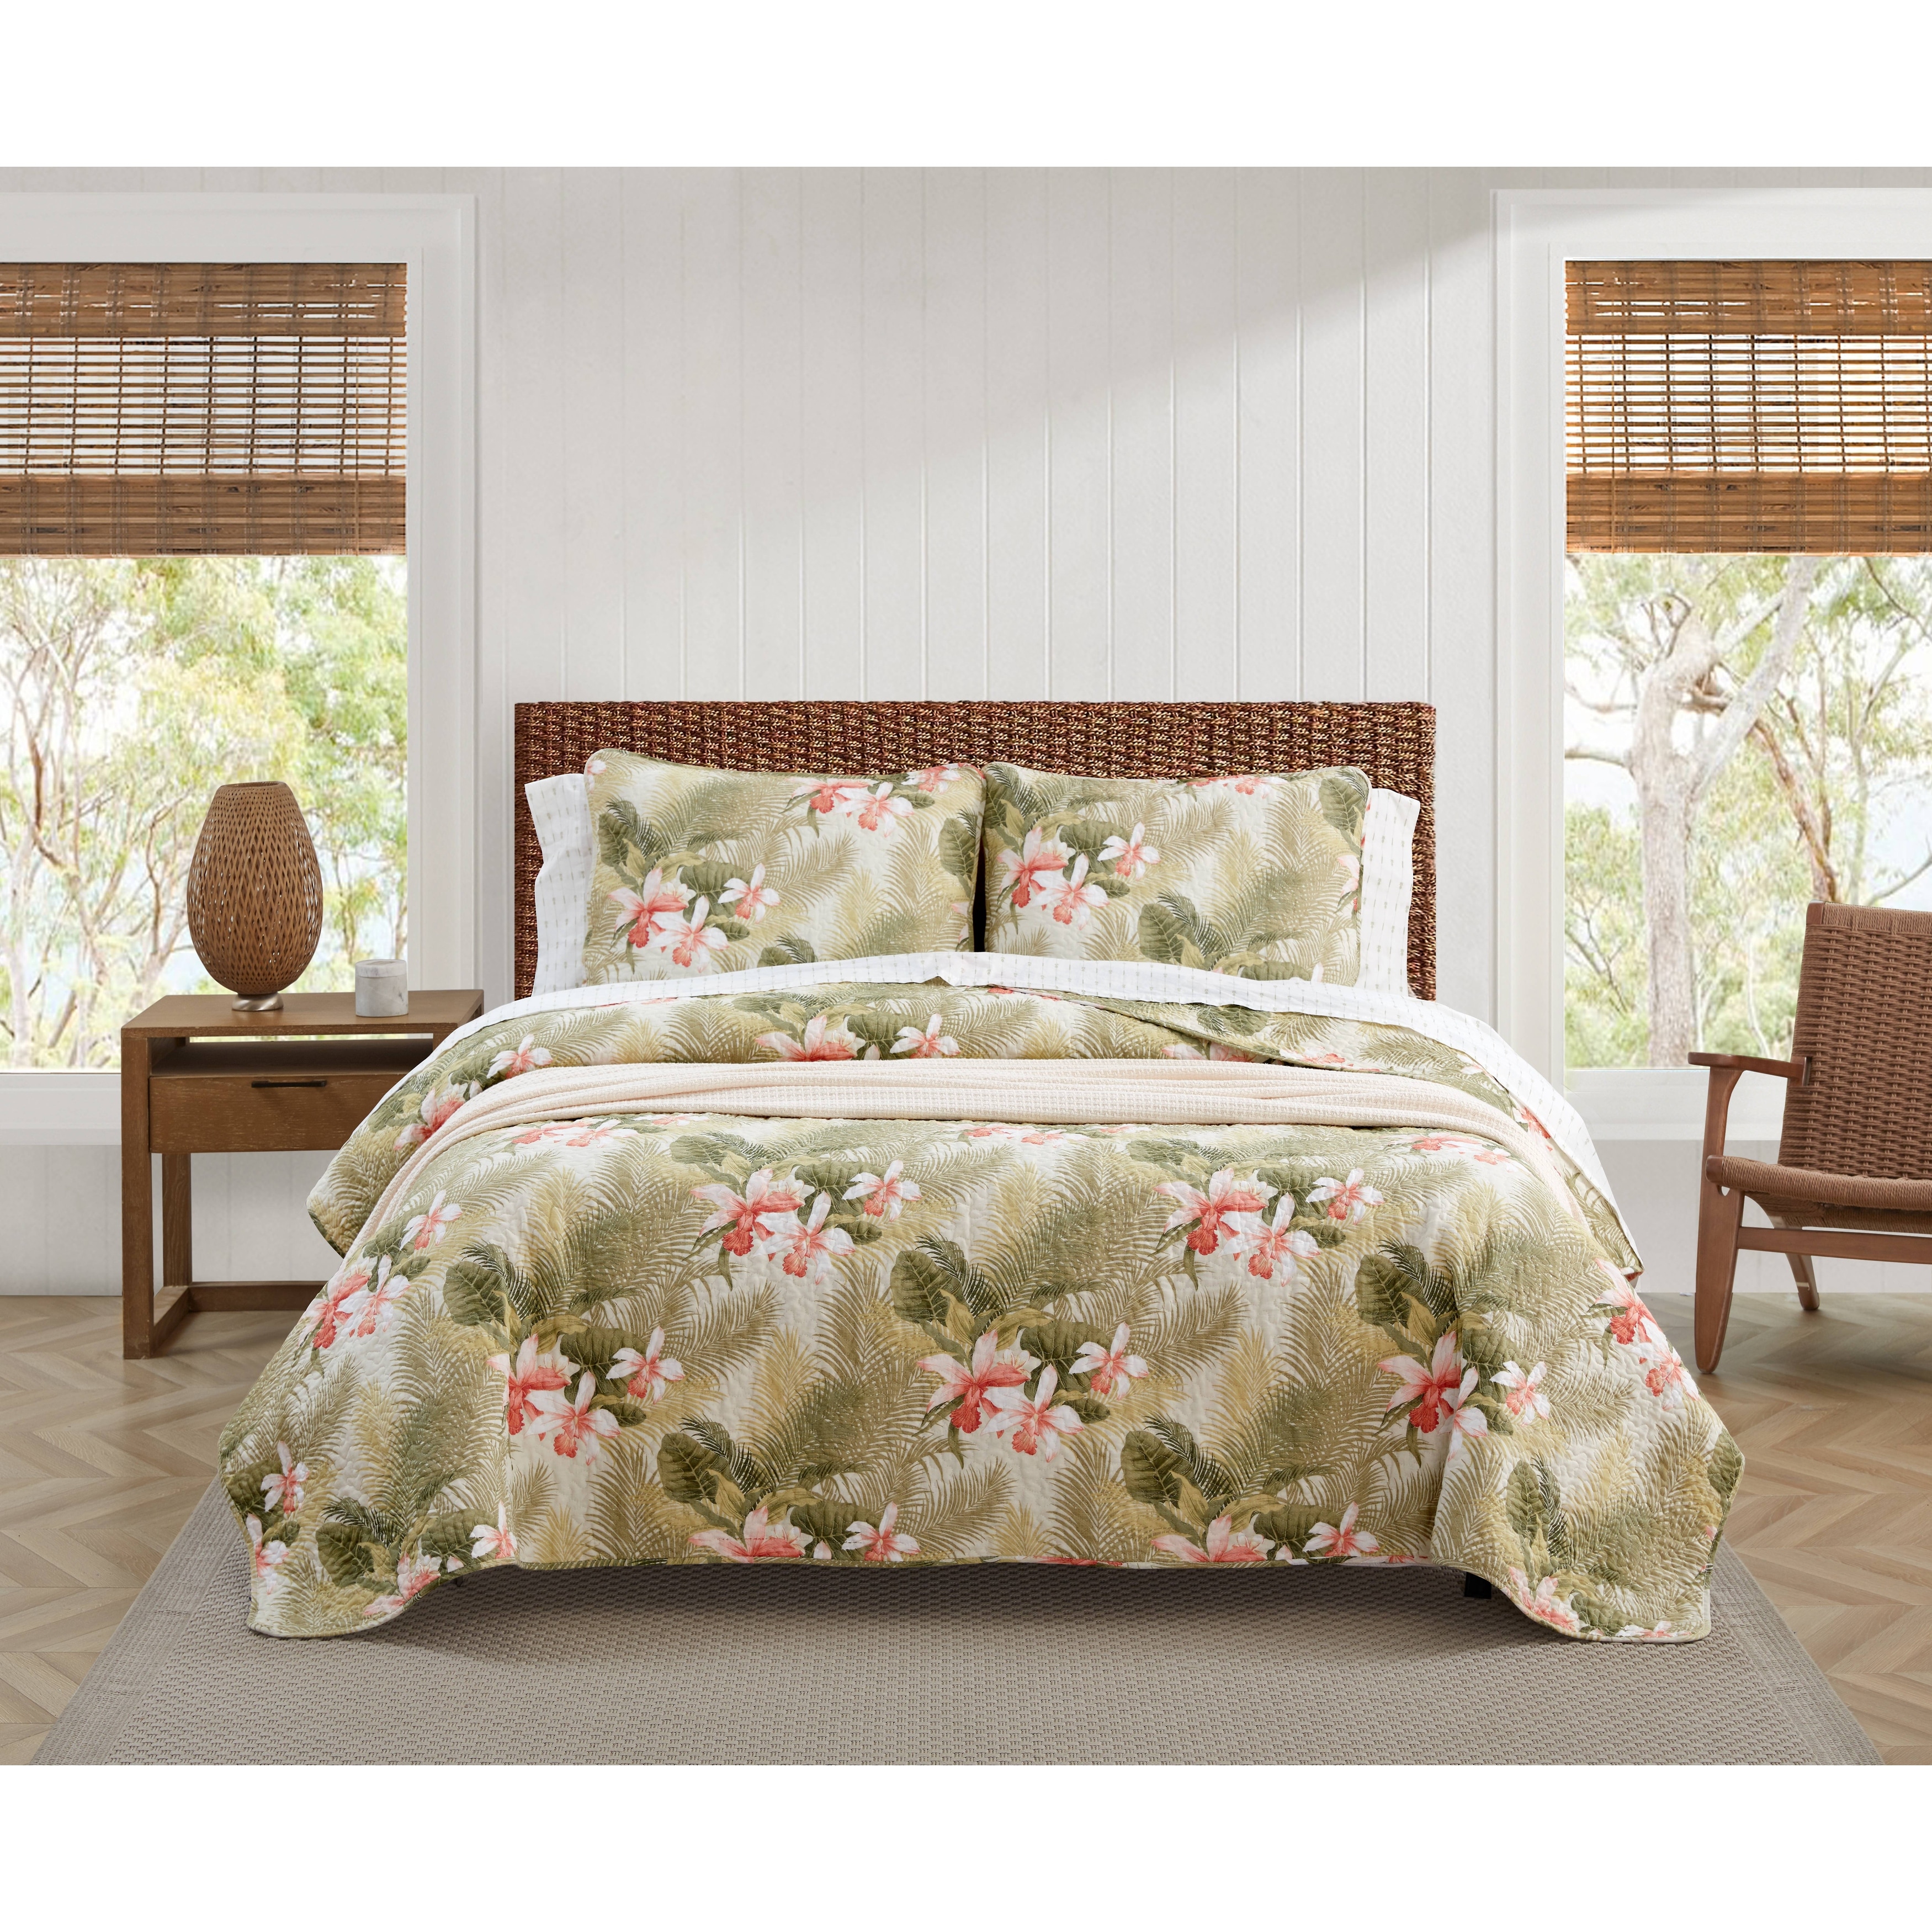 https://ak1.ostkcdn.com/images/products/is/images/direct/fabf9fac708e034d97f6566b6d9afa474d7dcb99/Tommy-Bahama-Tropical-Orchid-Green-Cotton-Reversible-Quilt-Set.jpg